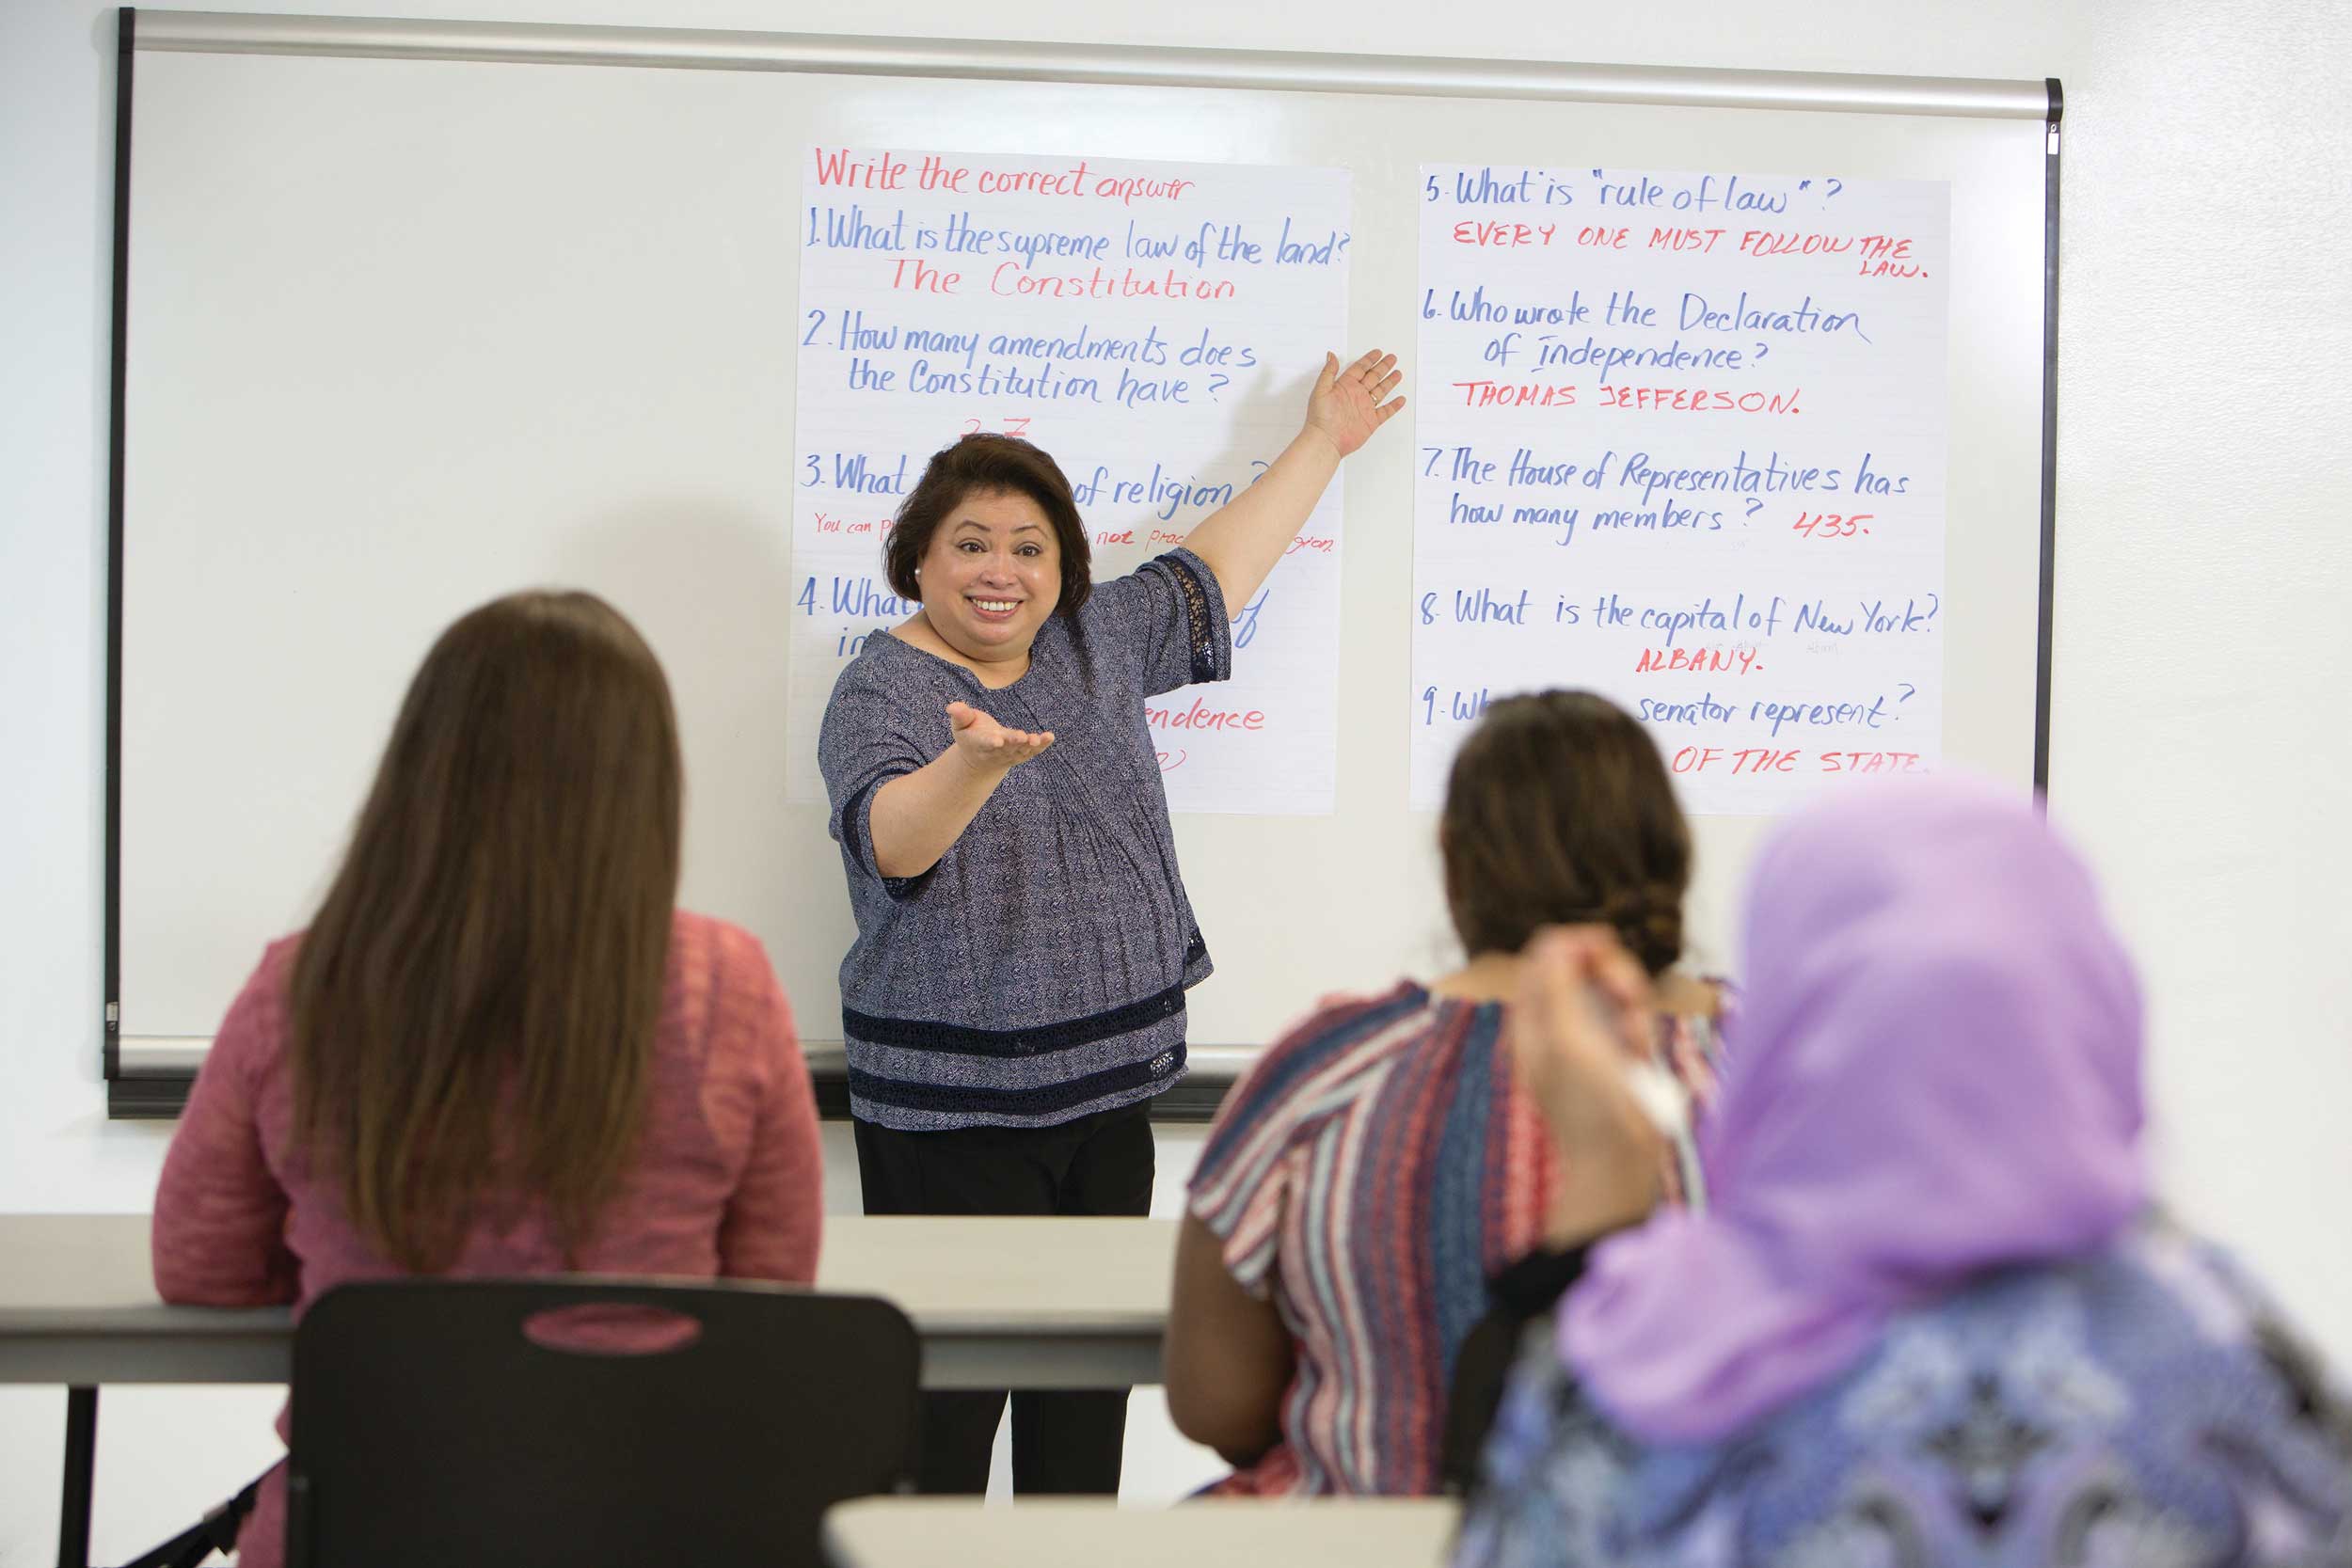 Woman pointing to a whiteboard in front of a classroom